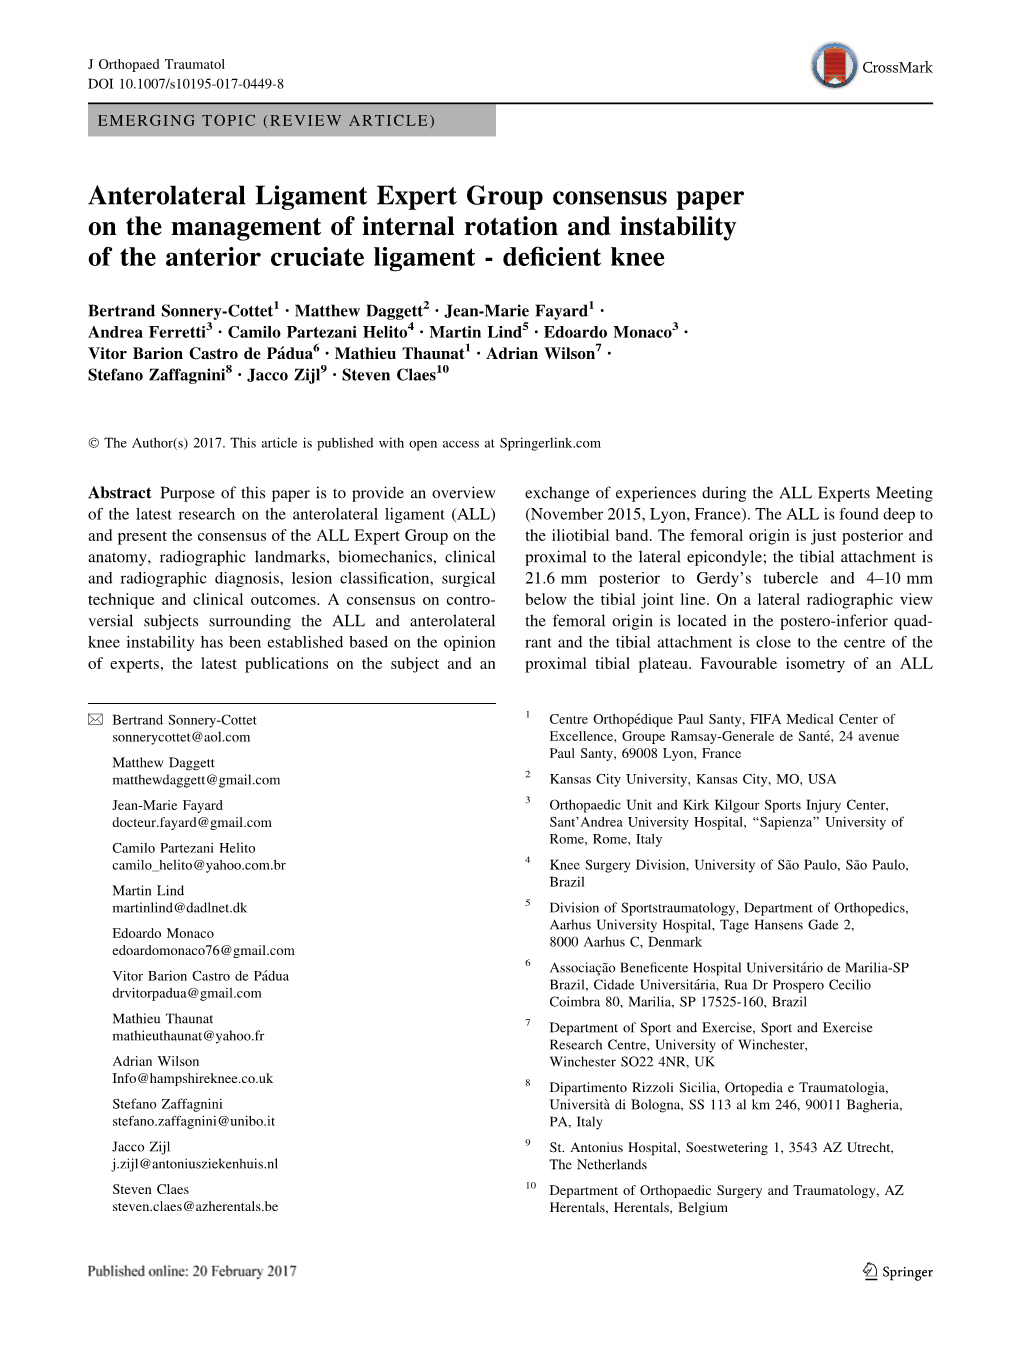 Anterolateral Ligament Expert Group Consensus Paper on the Management of Internal Rotation and Instability of the Anterior Cruciate Ligament - Deﬁcient Knee